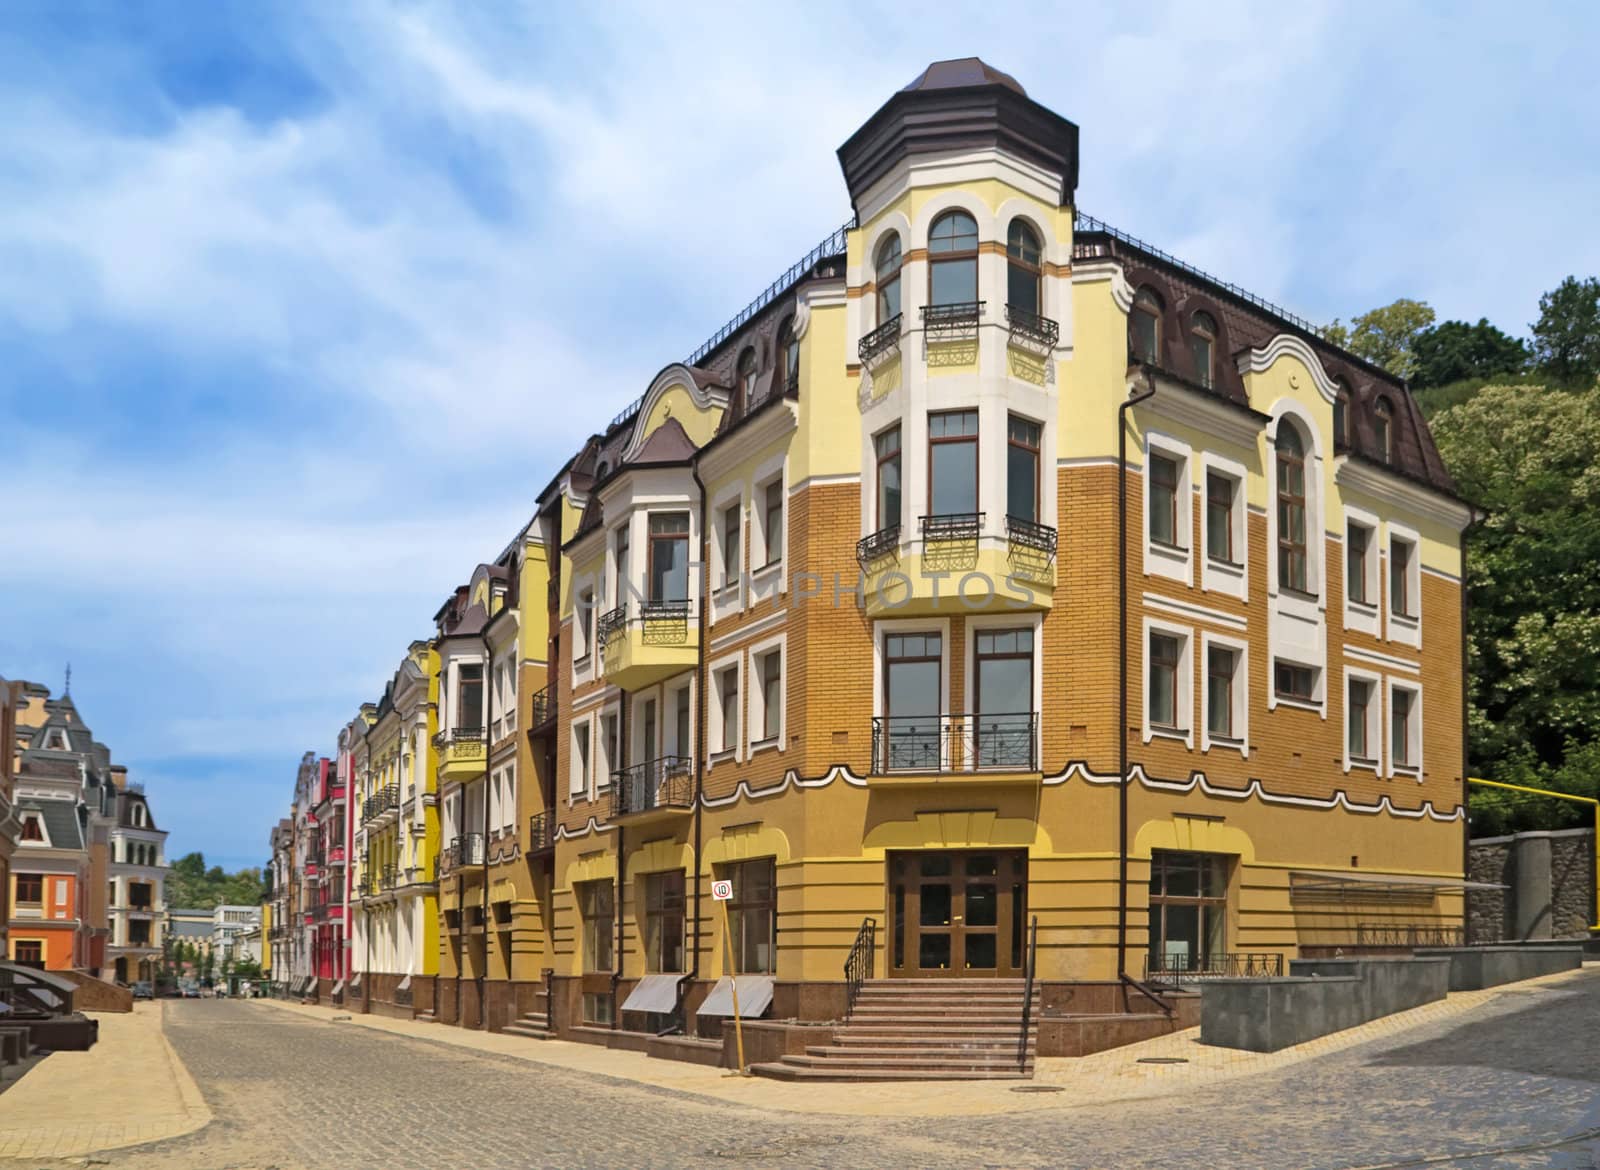 Old district of Kyiv with small beautiful houses